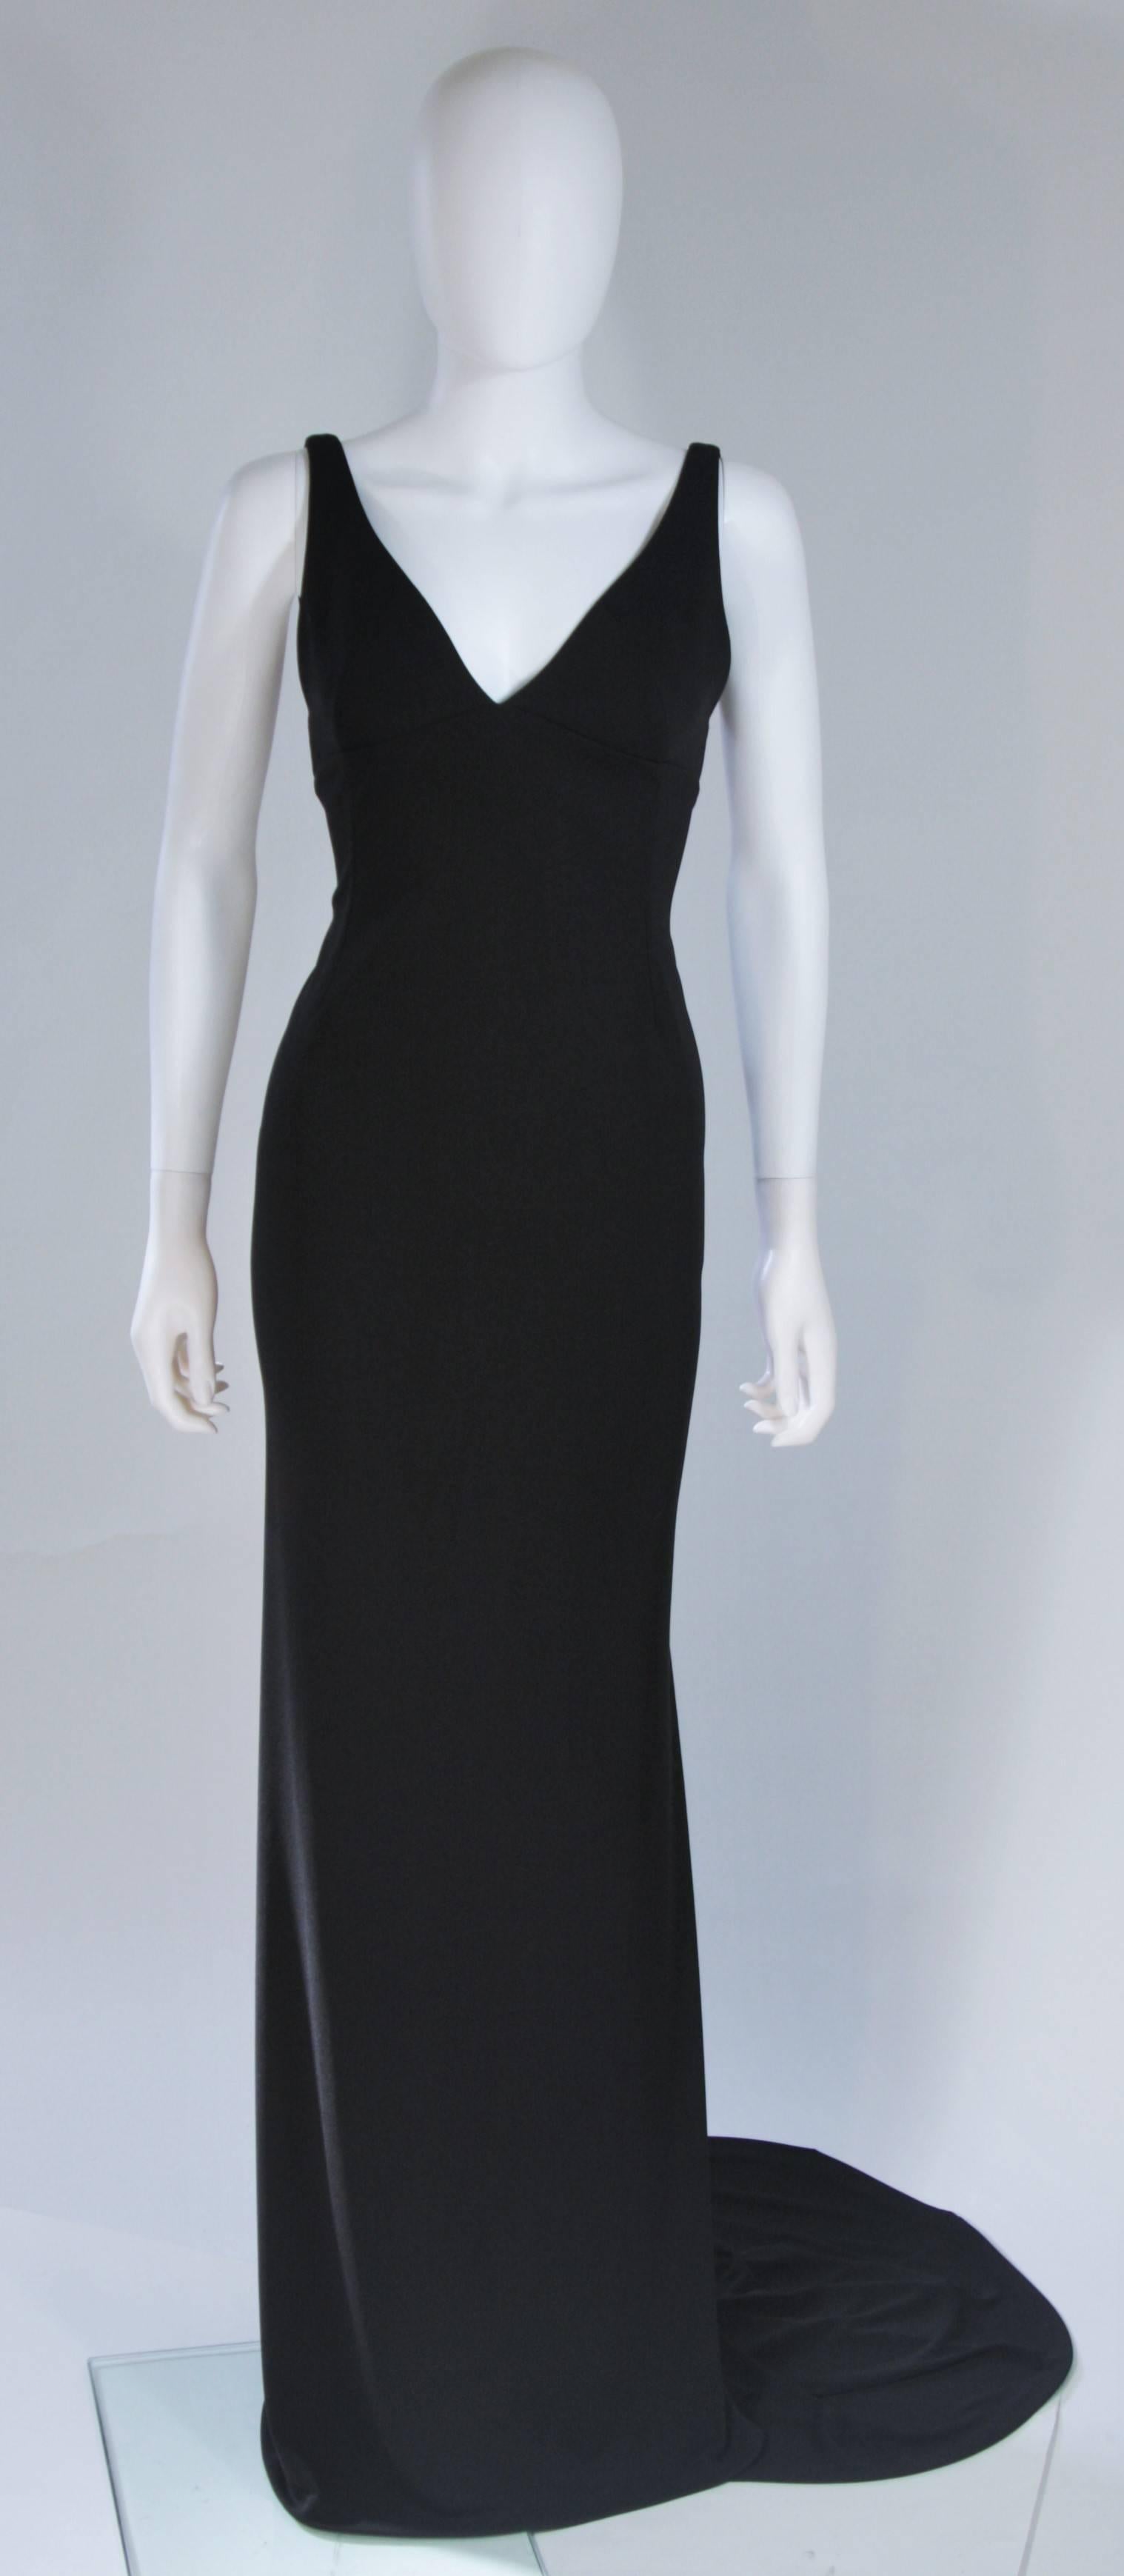  This Alex Perry  gown is composed of a black stretch jersey. The dress has a classic strap design and figure hugging contouring. There is a center back closure. In excellent condition. 

  **Please cross-reference measurements for personal